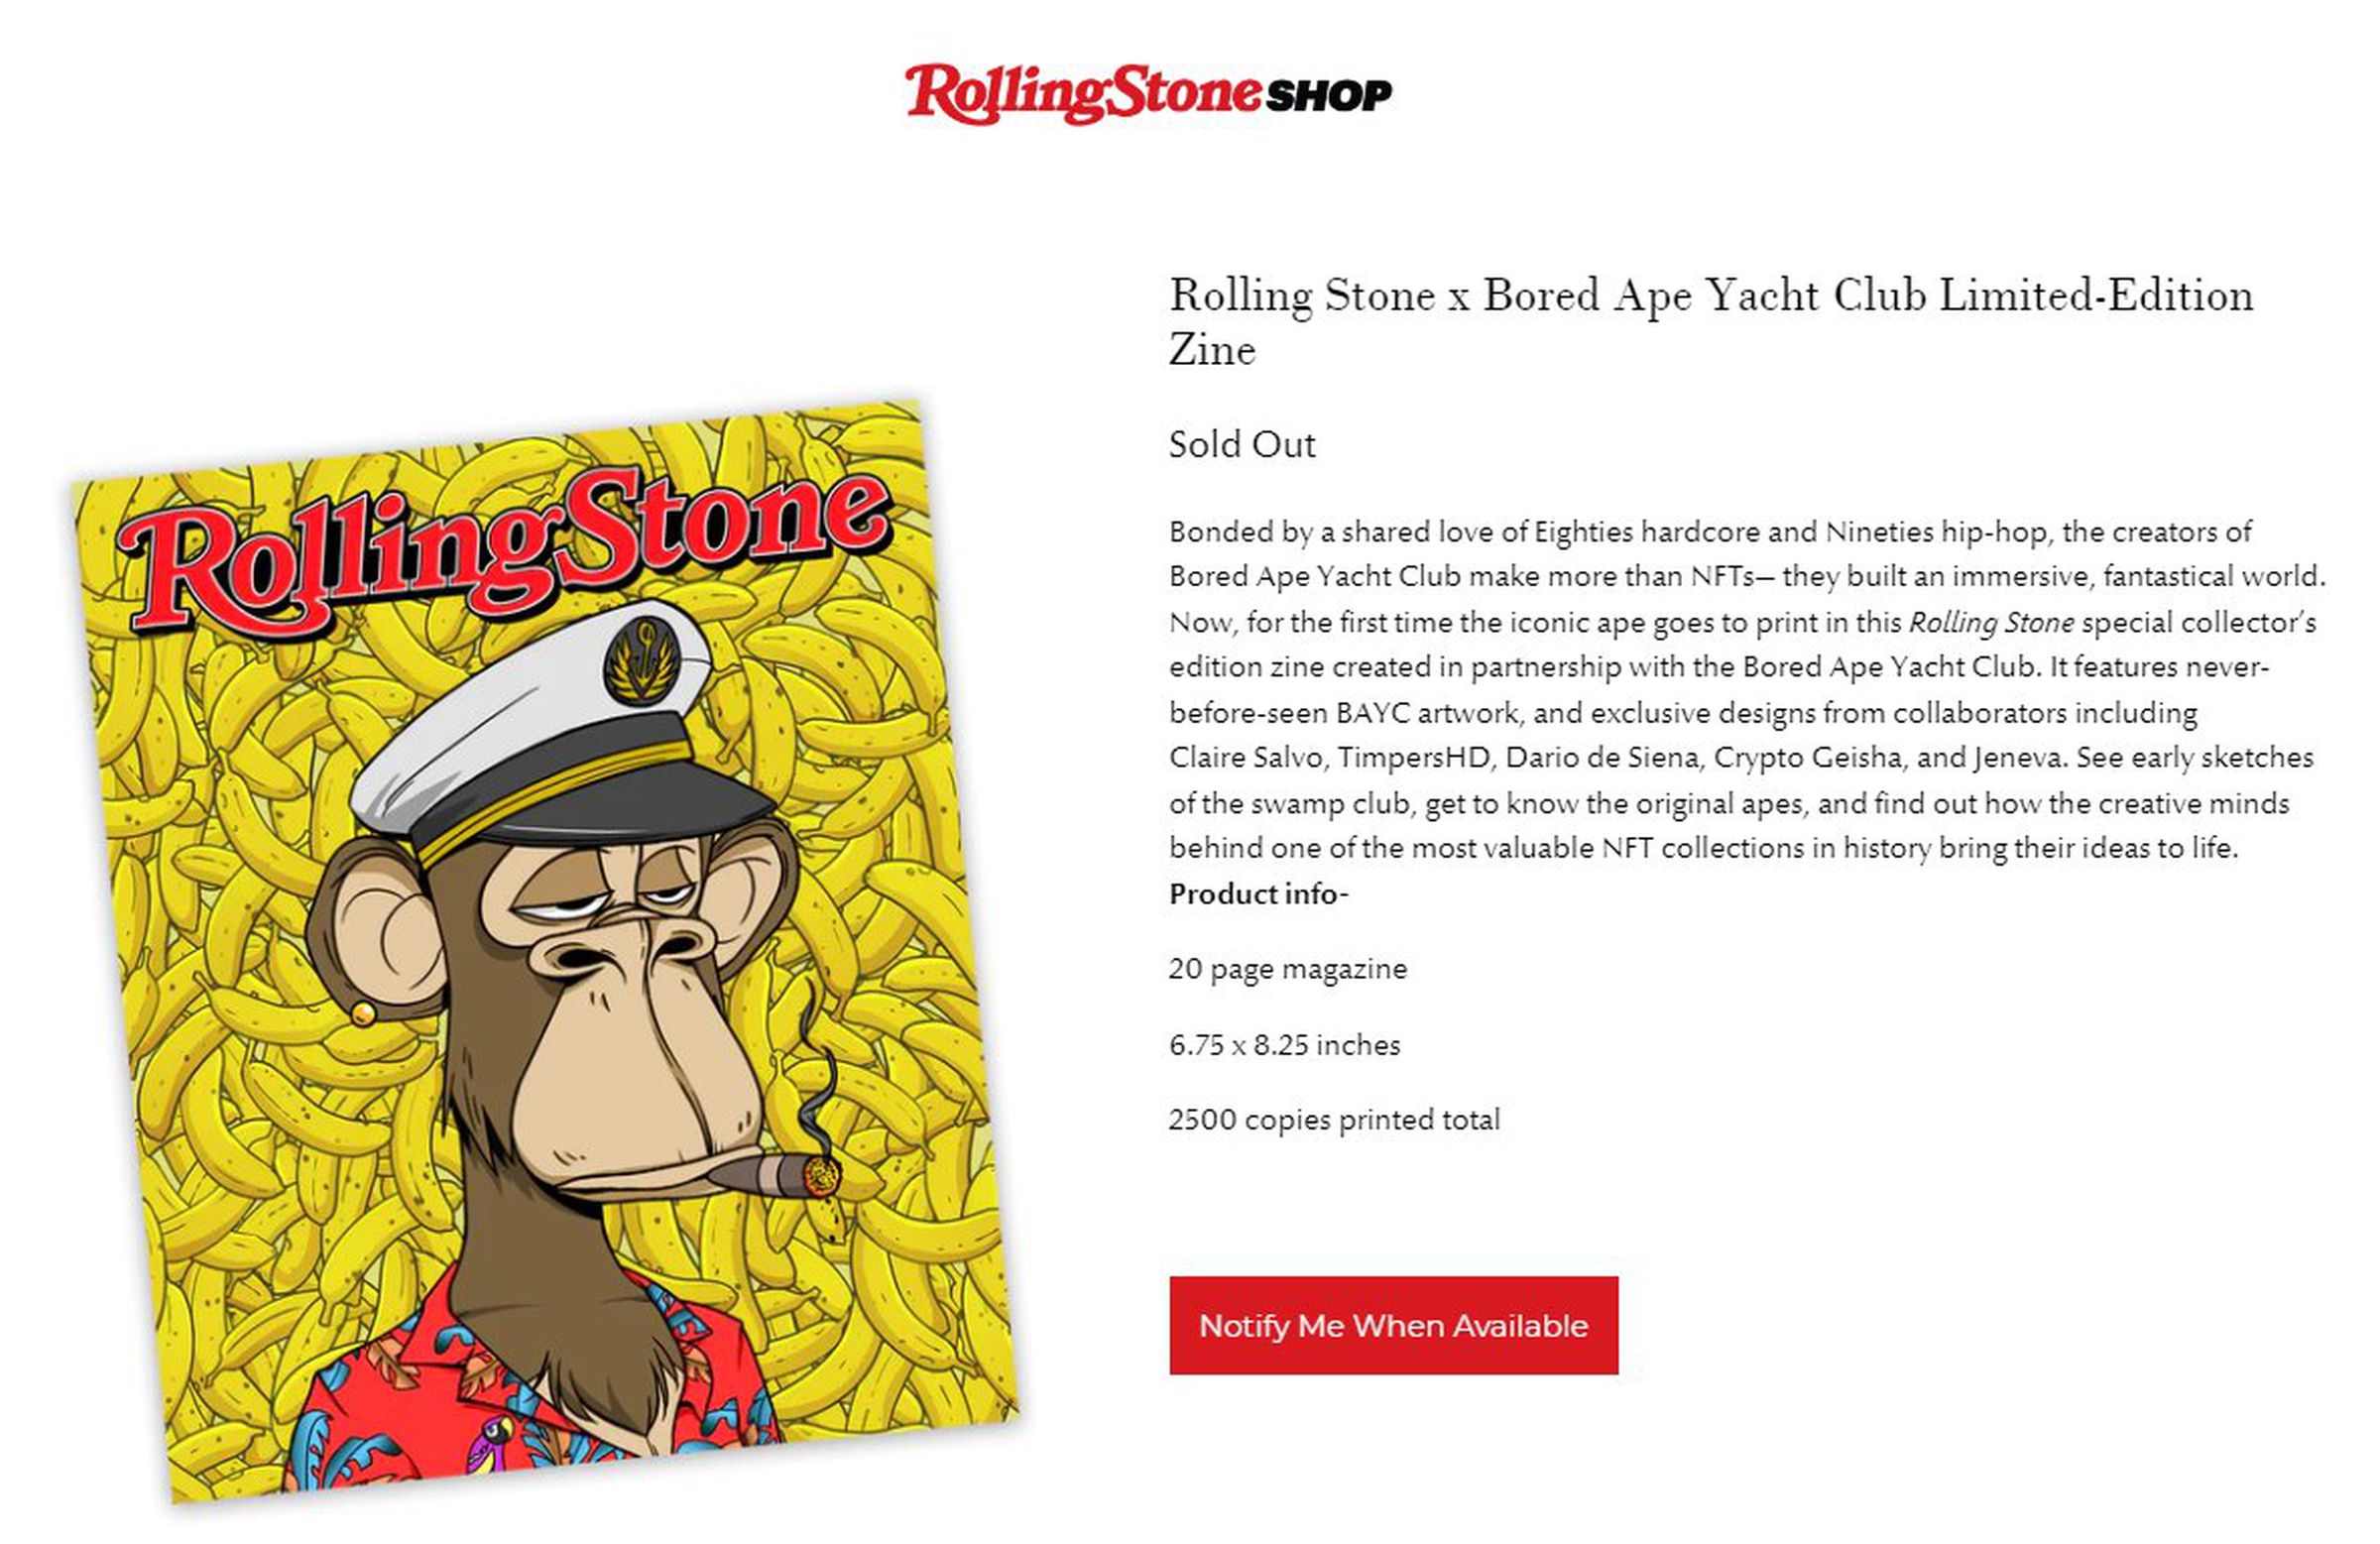 A Rolling Stone Shop page advertising the “Rolling Stone x Bored Ape Yacht Club Limited-Edition Zine” which is now sold out.